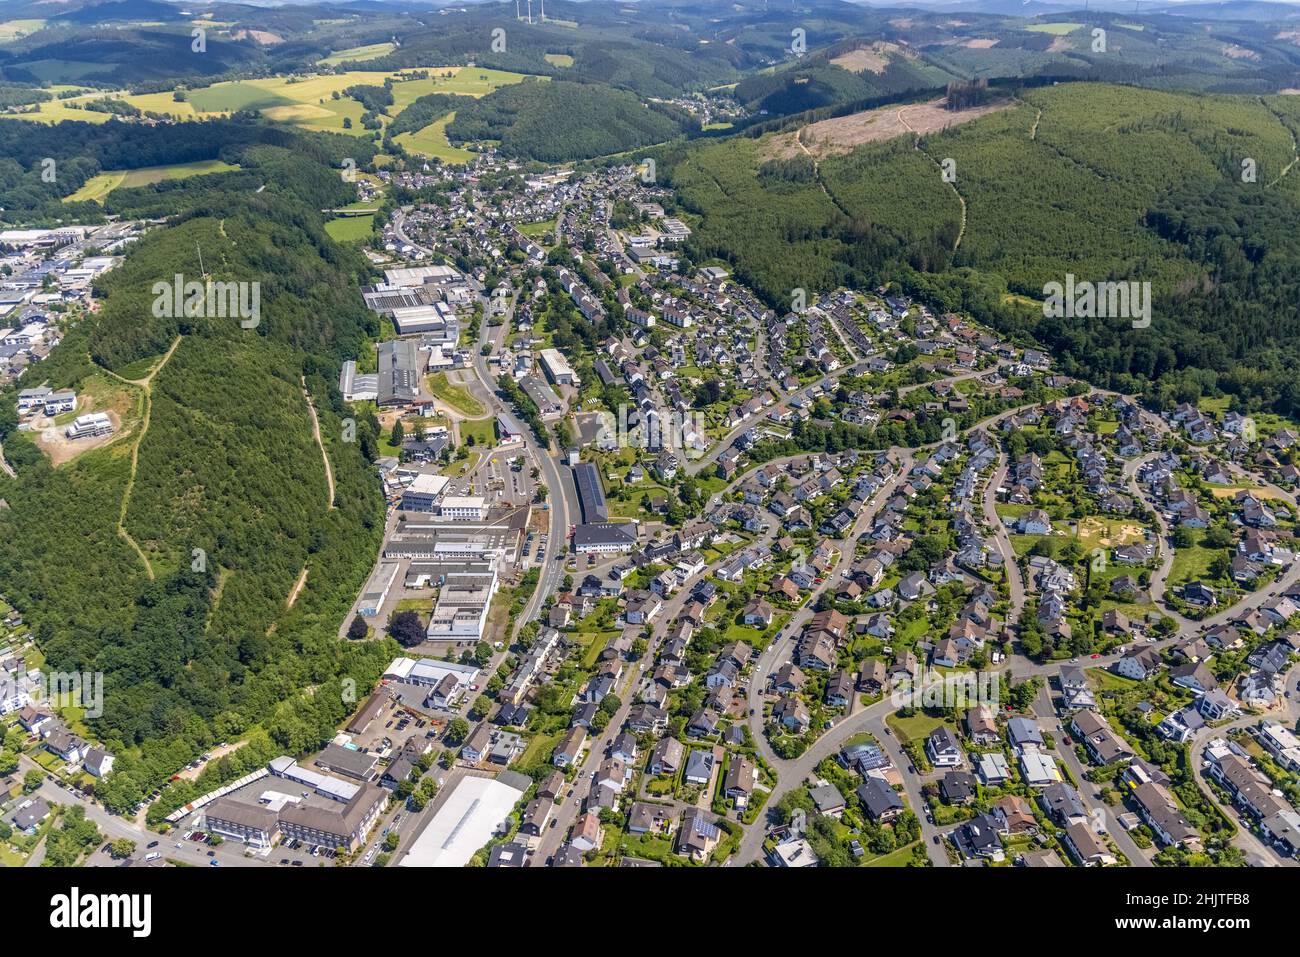 Page 10 - Gewerbegebiet High Resolution Stock Photography and Images - Alamy